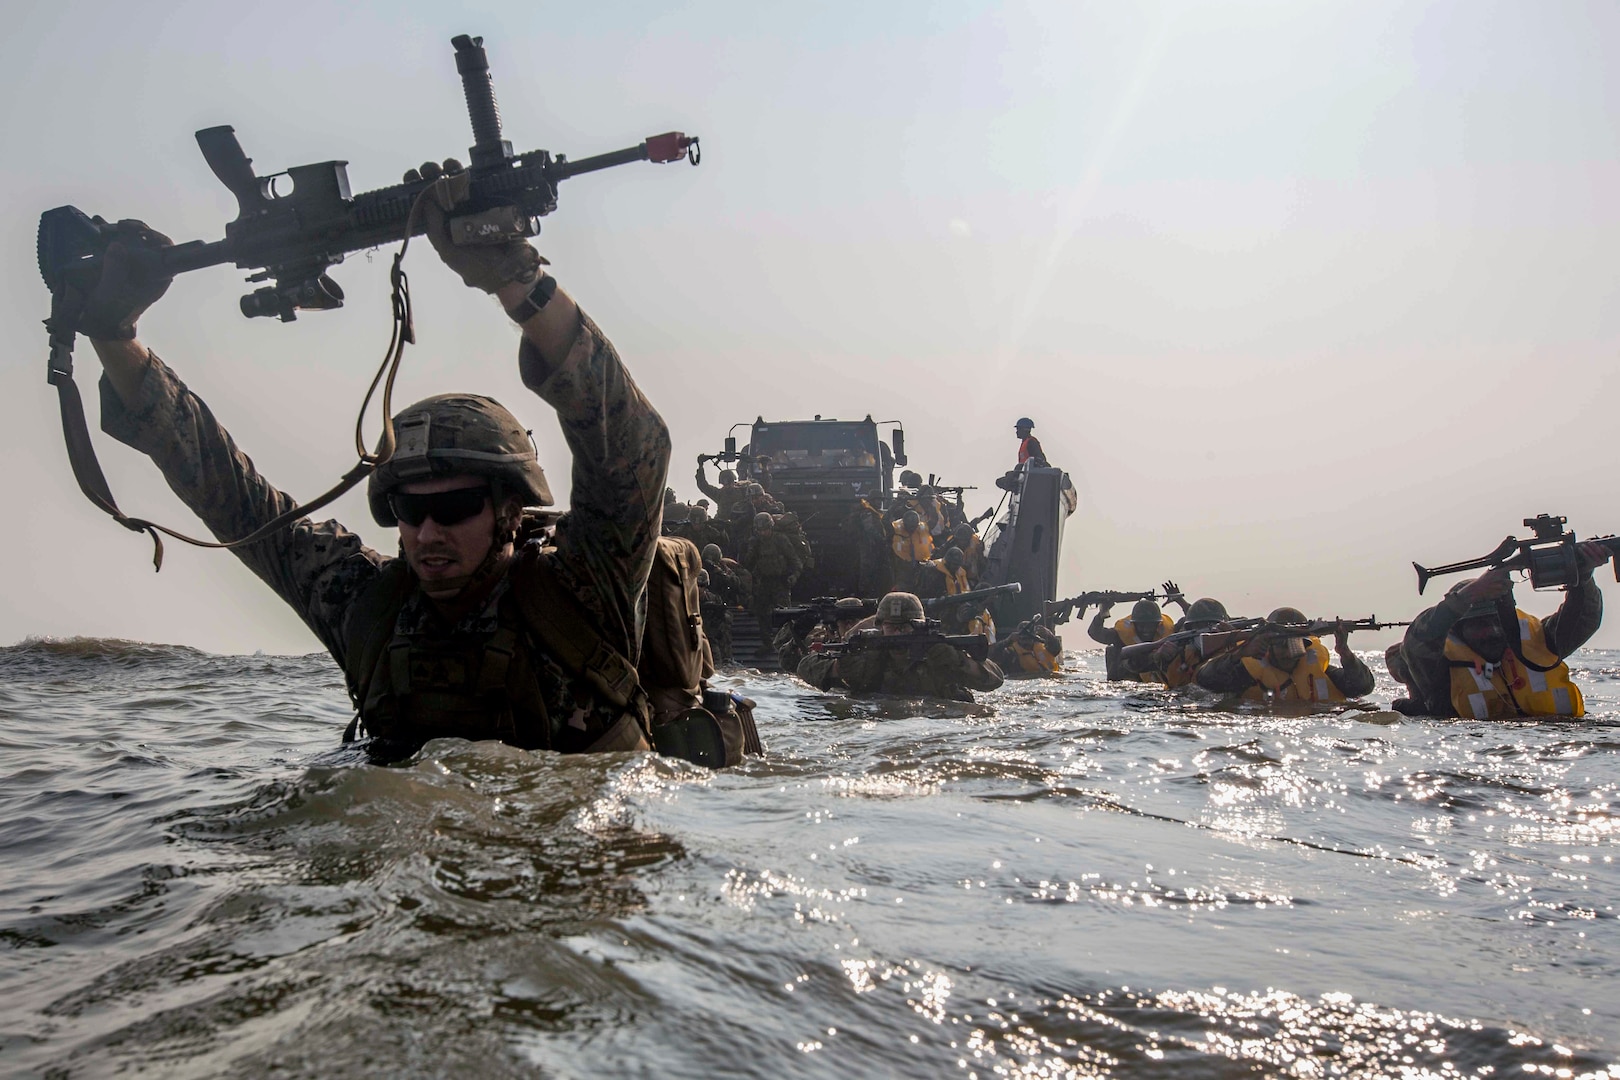 Marines currently under 4th Marine Regiment, 3rd Marine Division, and members of Indian military wade to shore during exercise Tiger Triumph, on
Kakinada Beach, India, November 19, 2019 (U.S. Marine Corps/Christian Ayers)